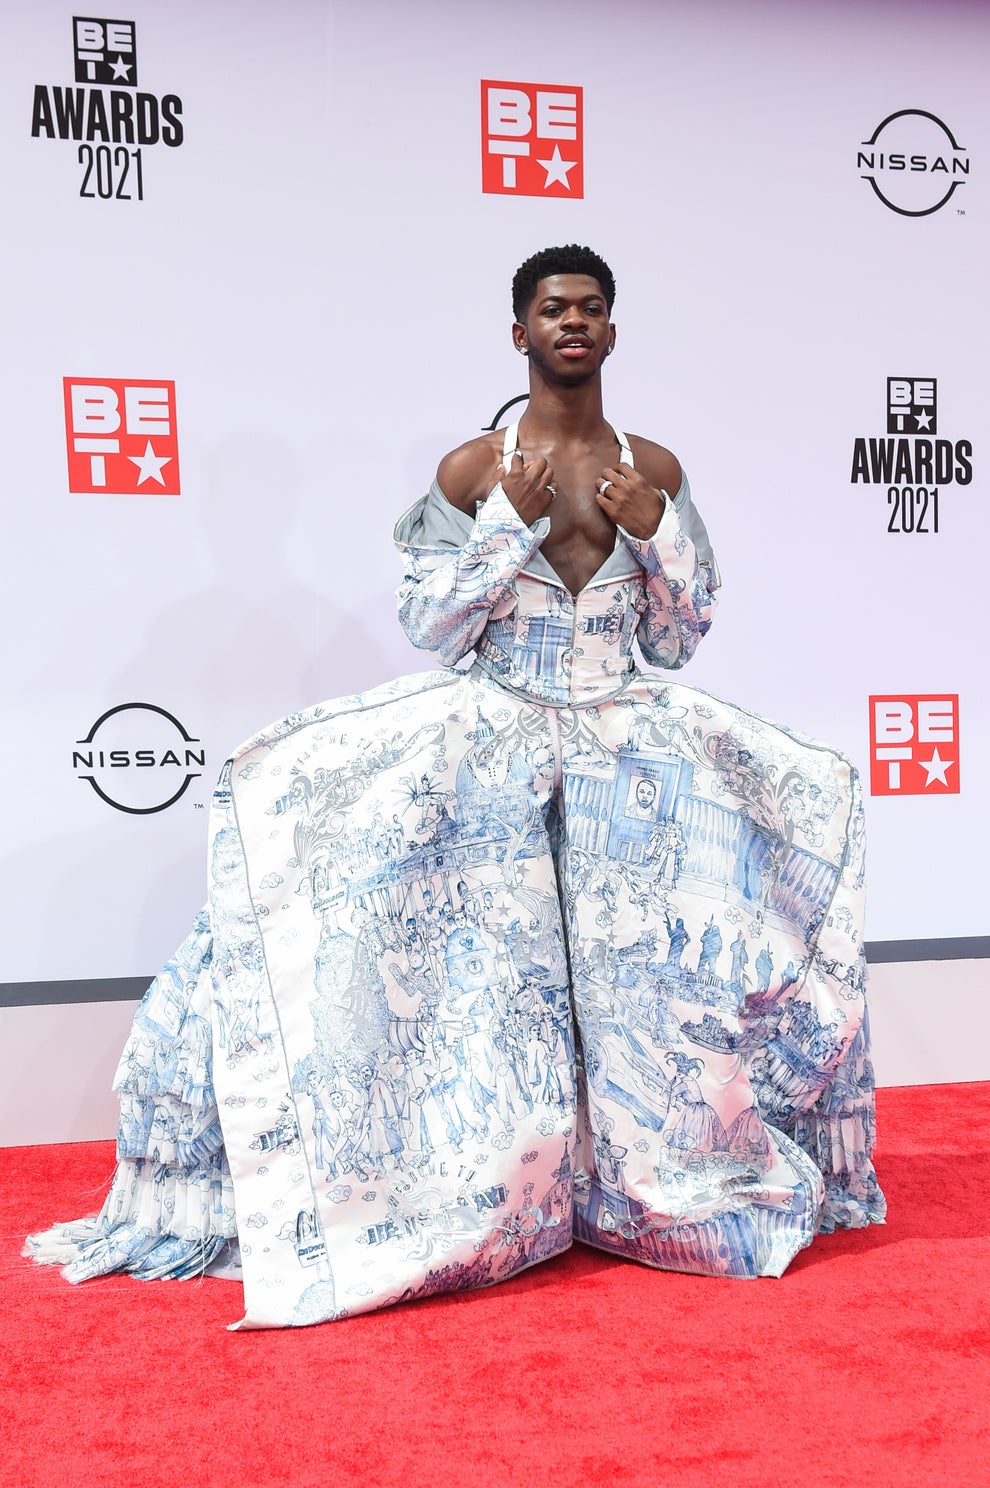 Lil Nas Xs 2021 Bet Awards Outfits Are Works Of Art